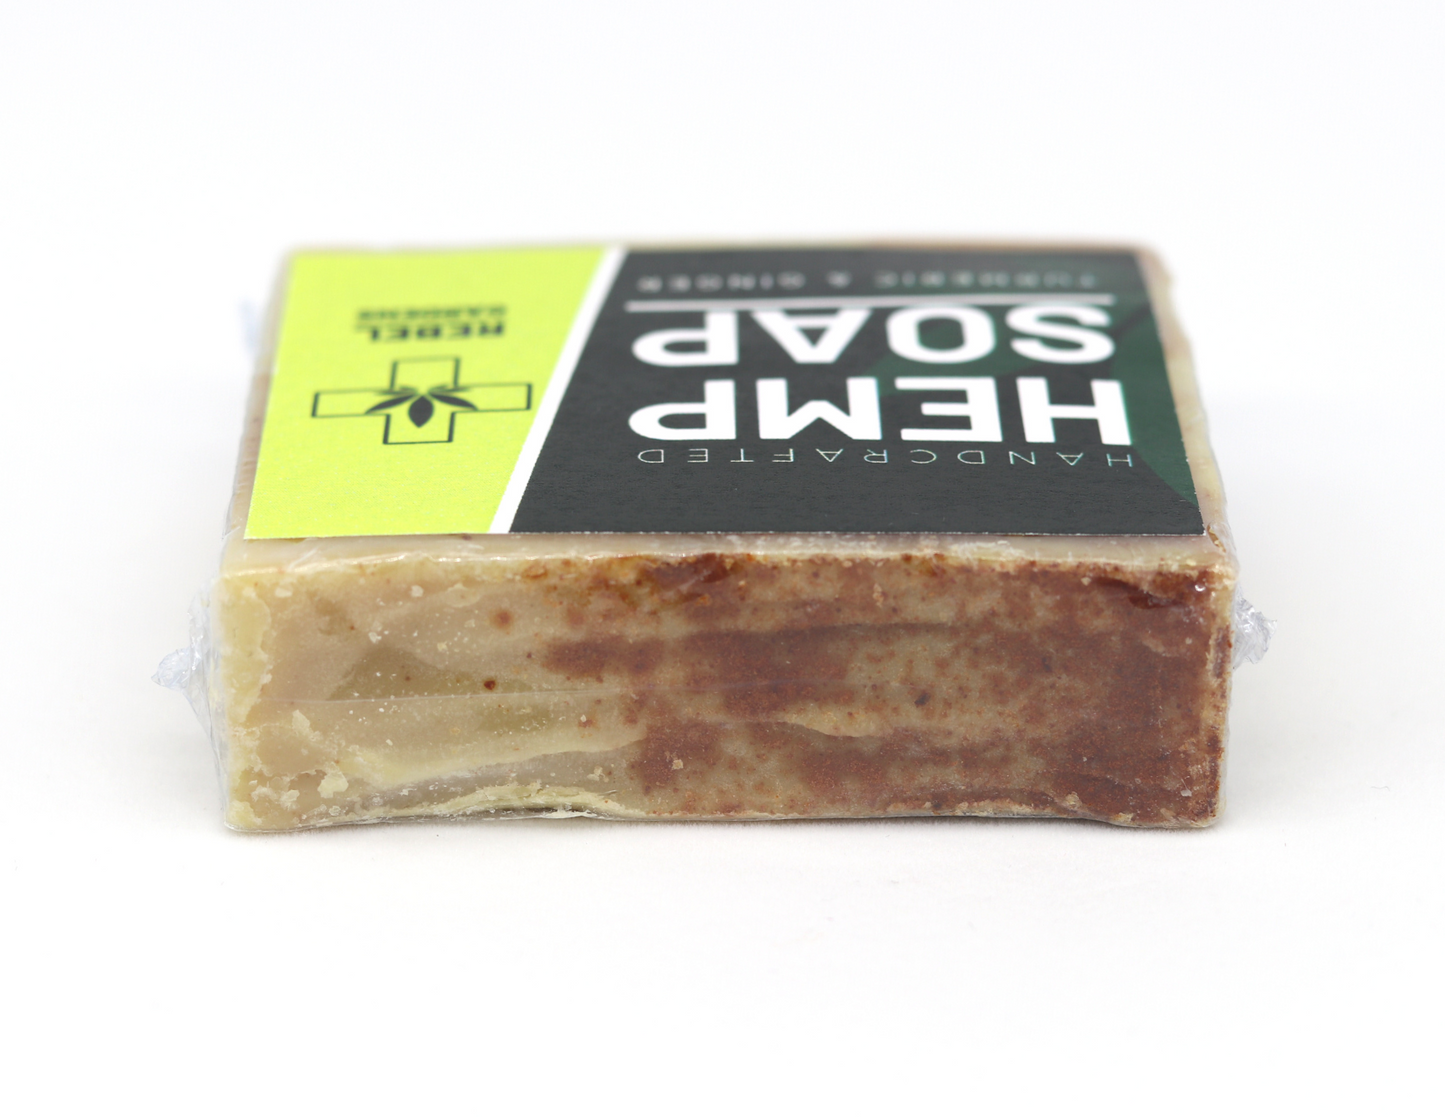 Handcrafted Bar Soap